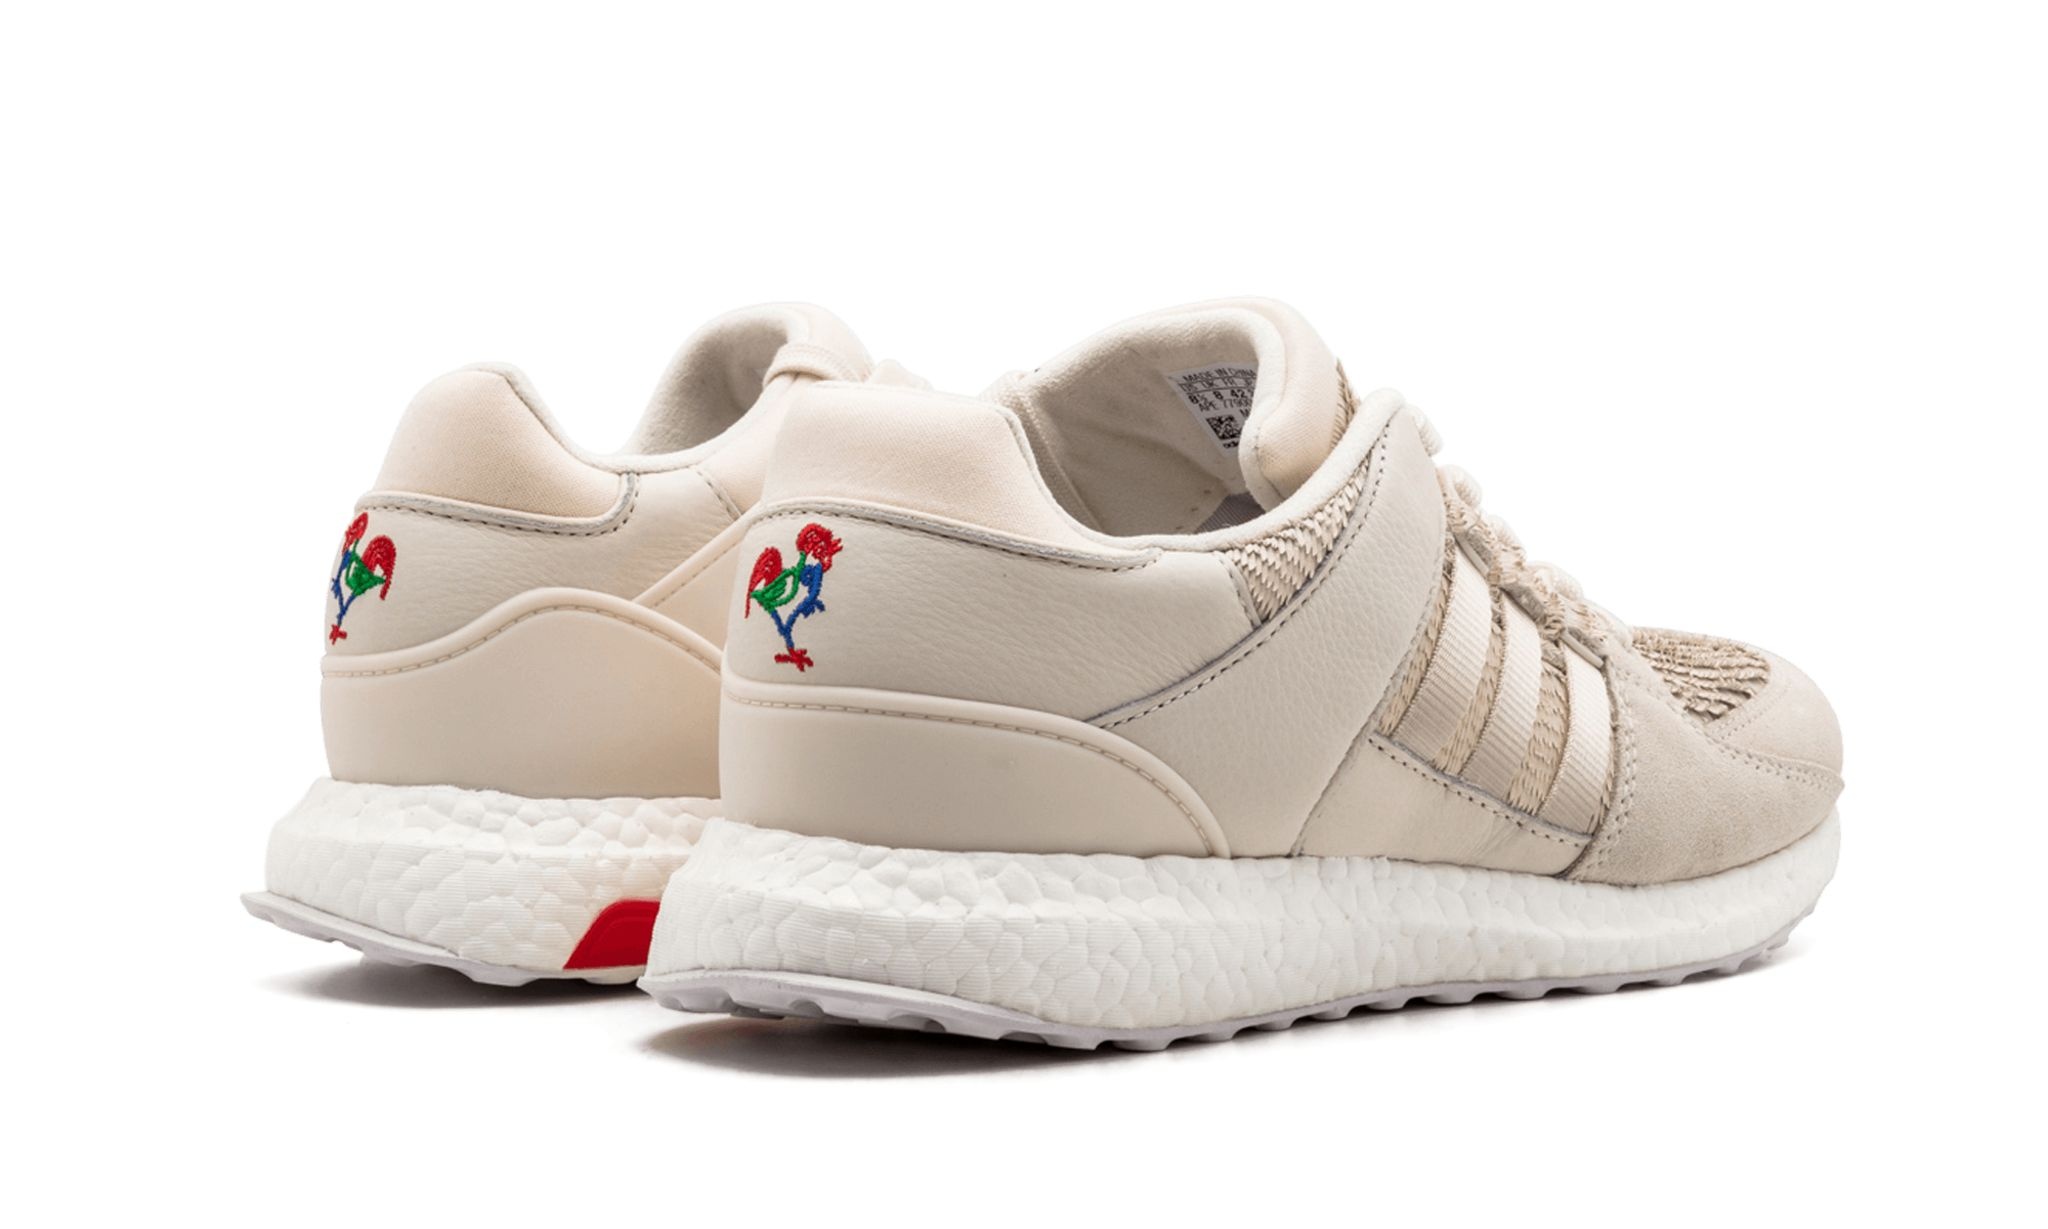 EQT Support Ultra CNY "Chinese New Year" - 3